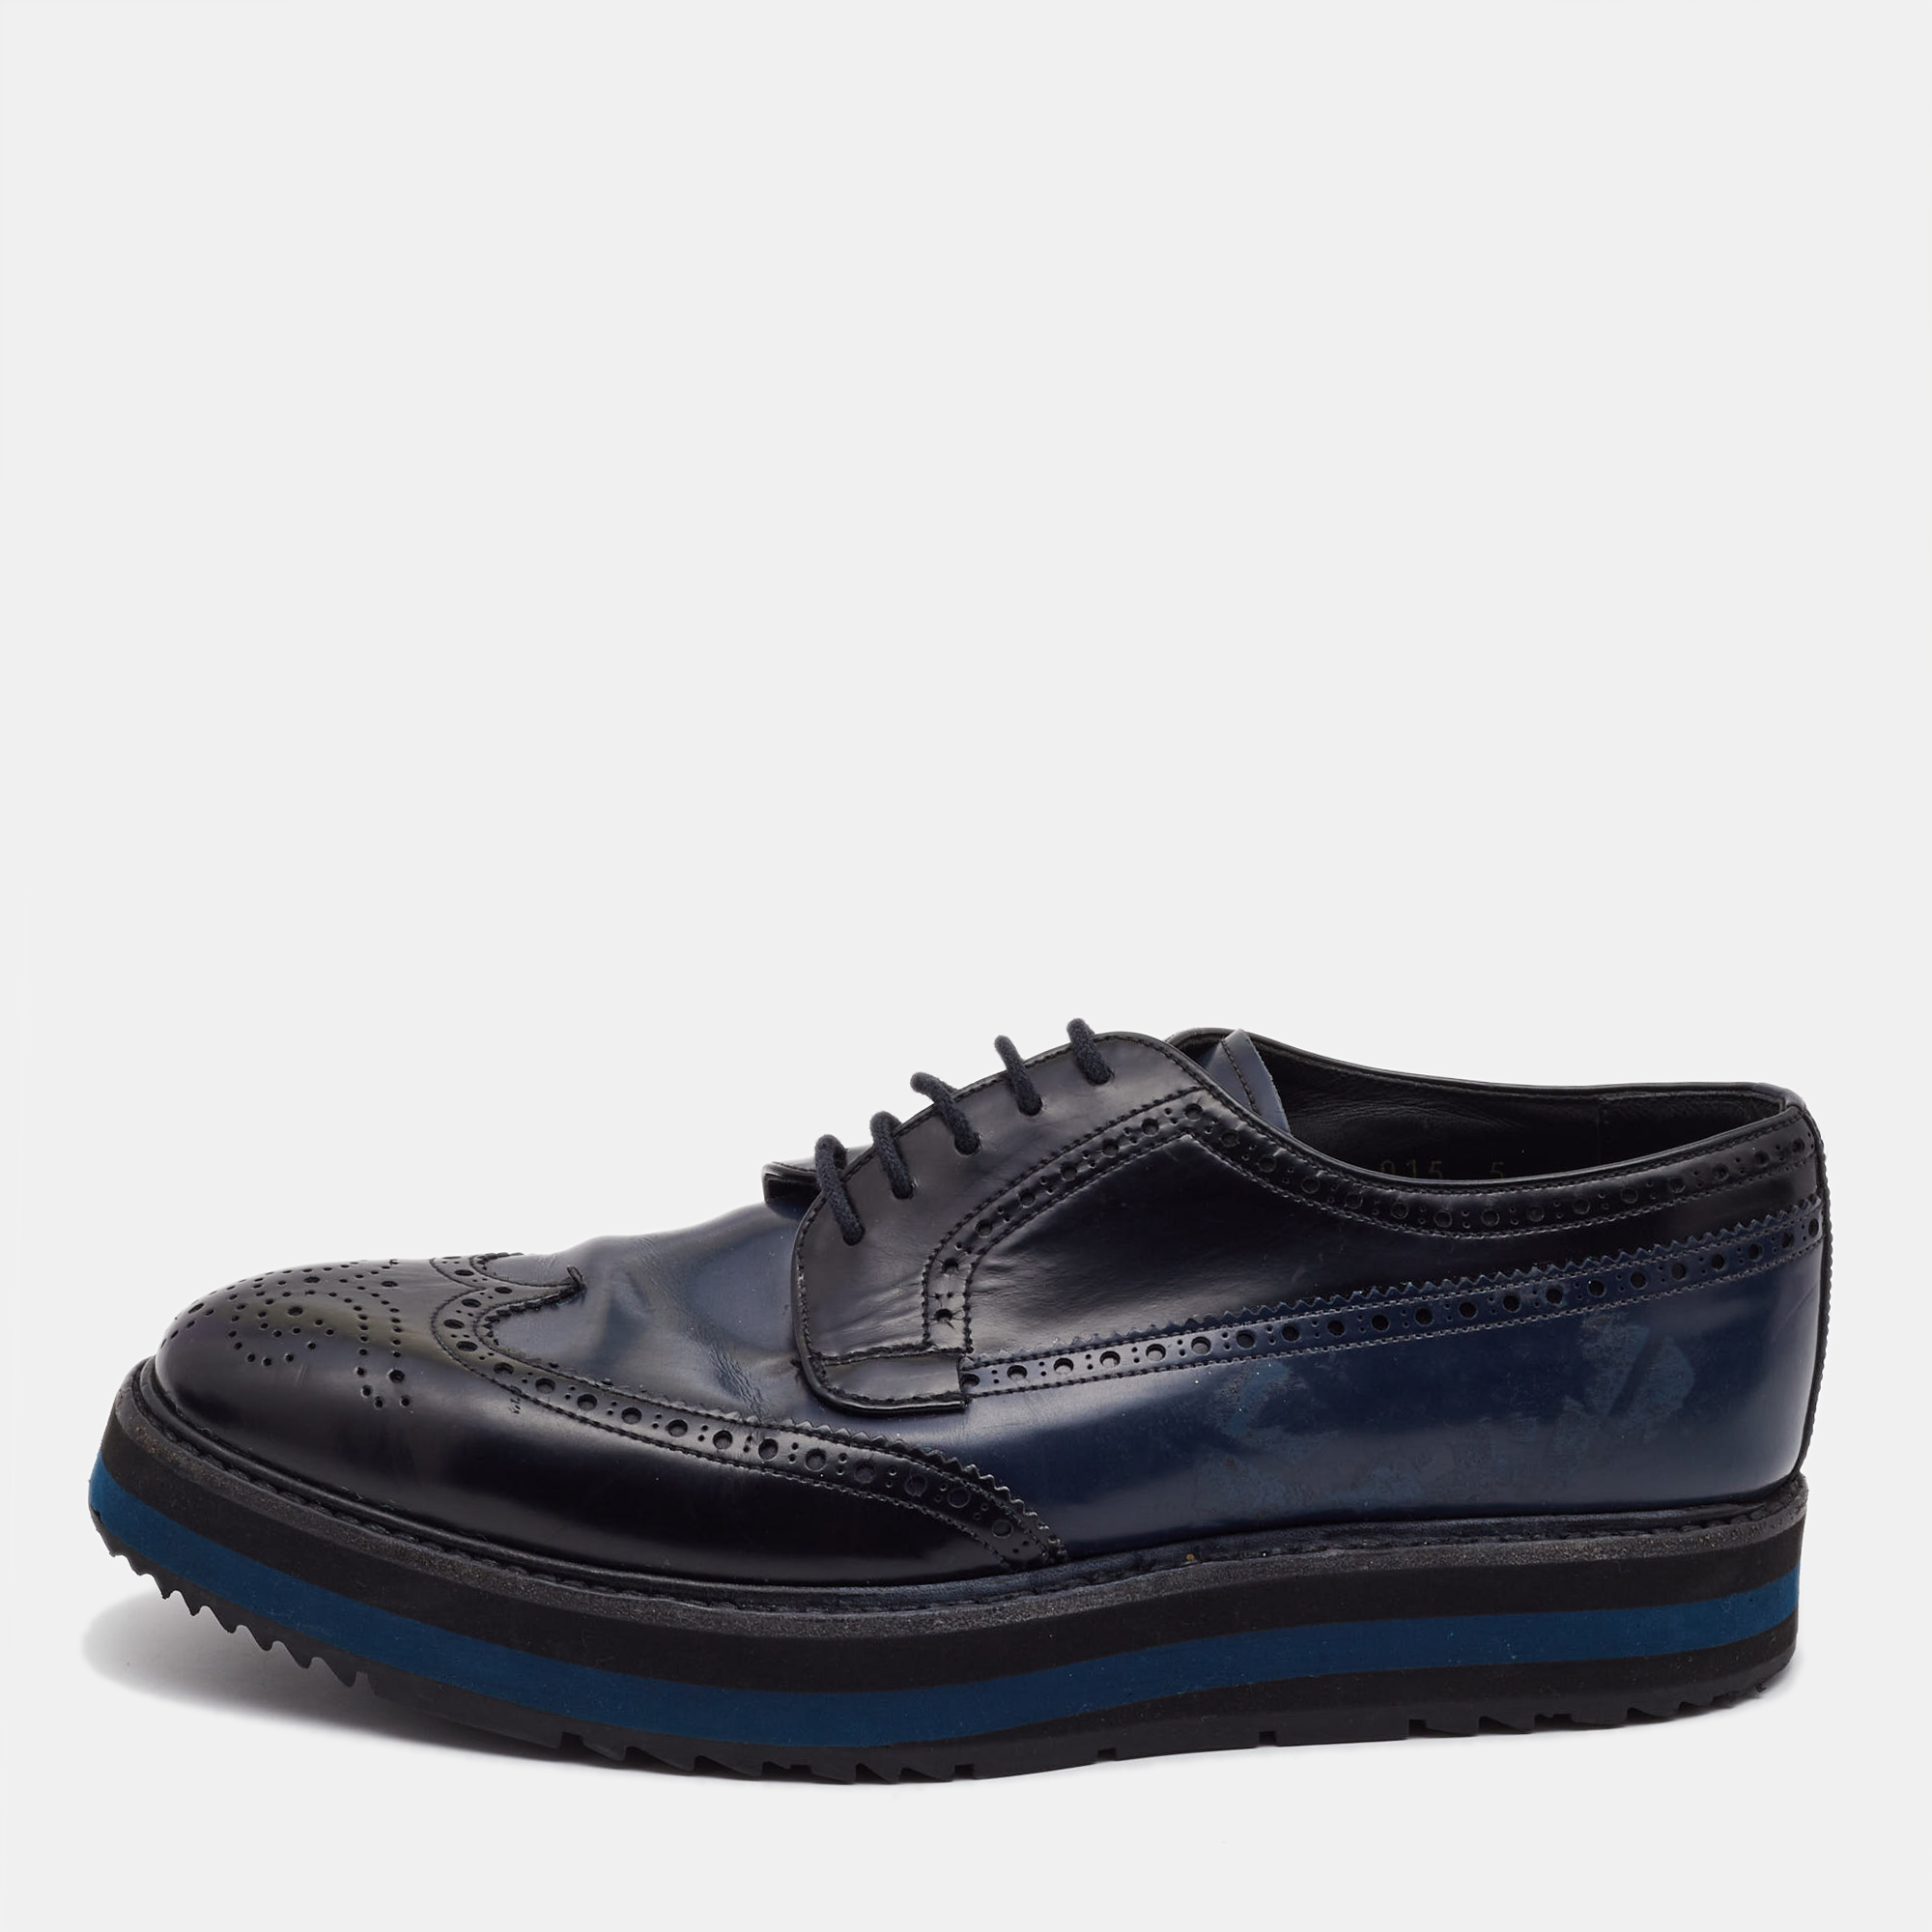 Pre-owned Prada Black/navy Blue Patent Leather Brogue Oxford Sneakers Size 39